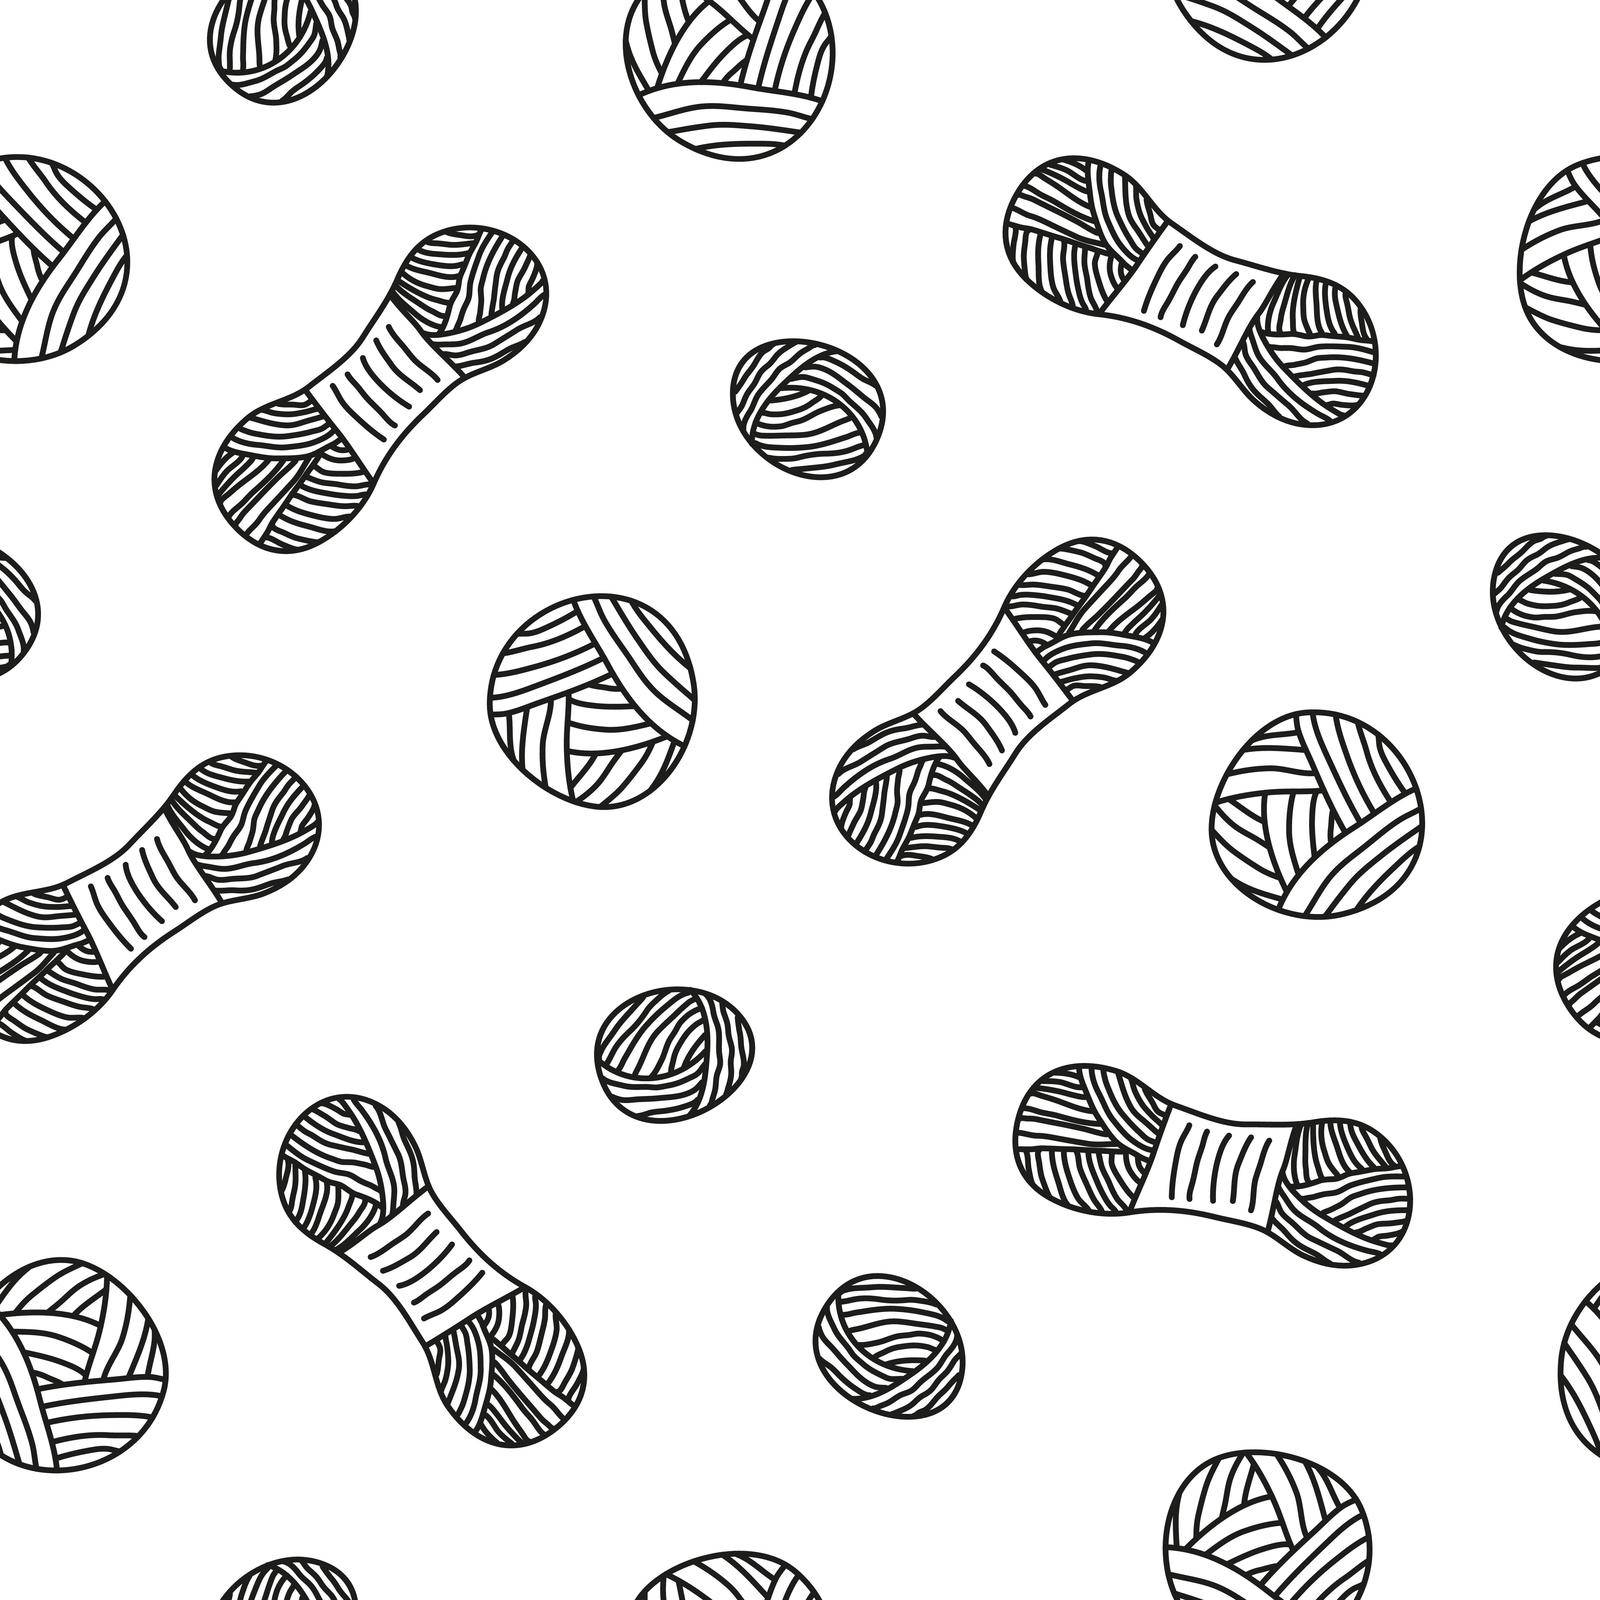 Black and white seamless pattern with doodle outline skeins and balls of yarn.